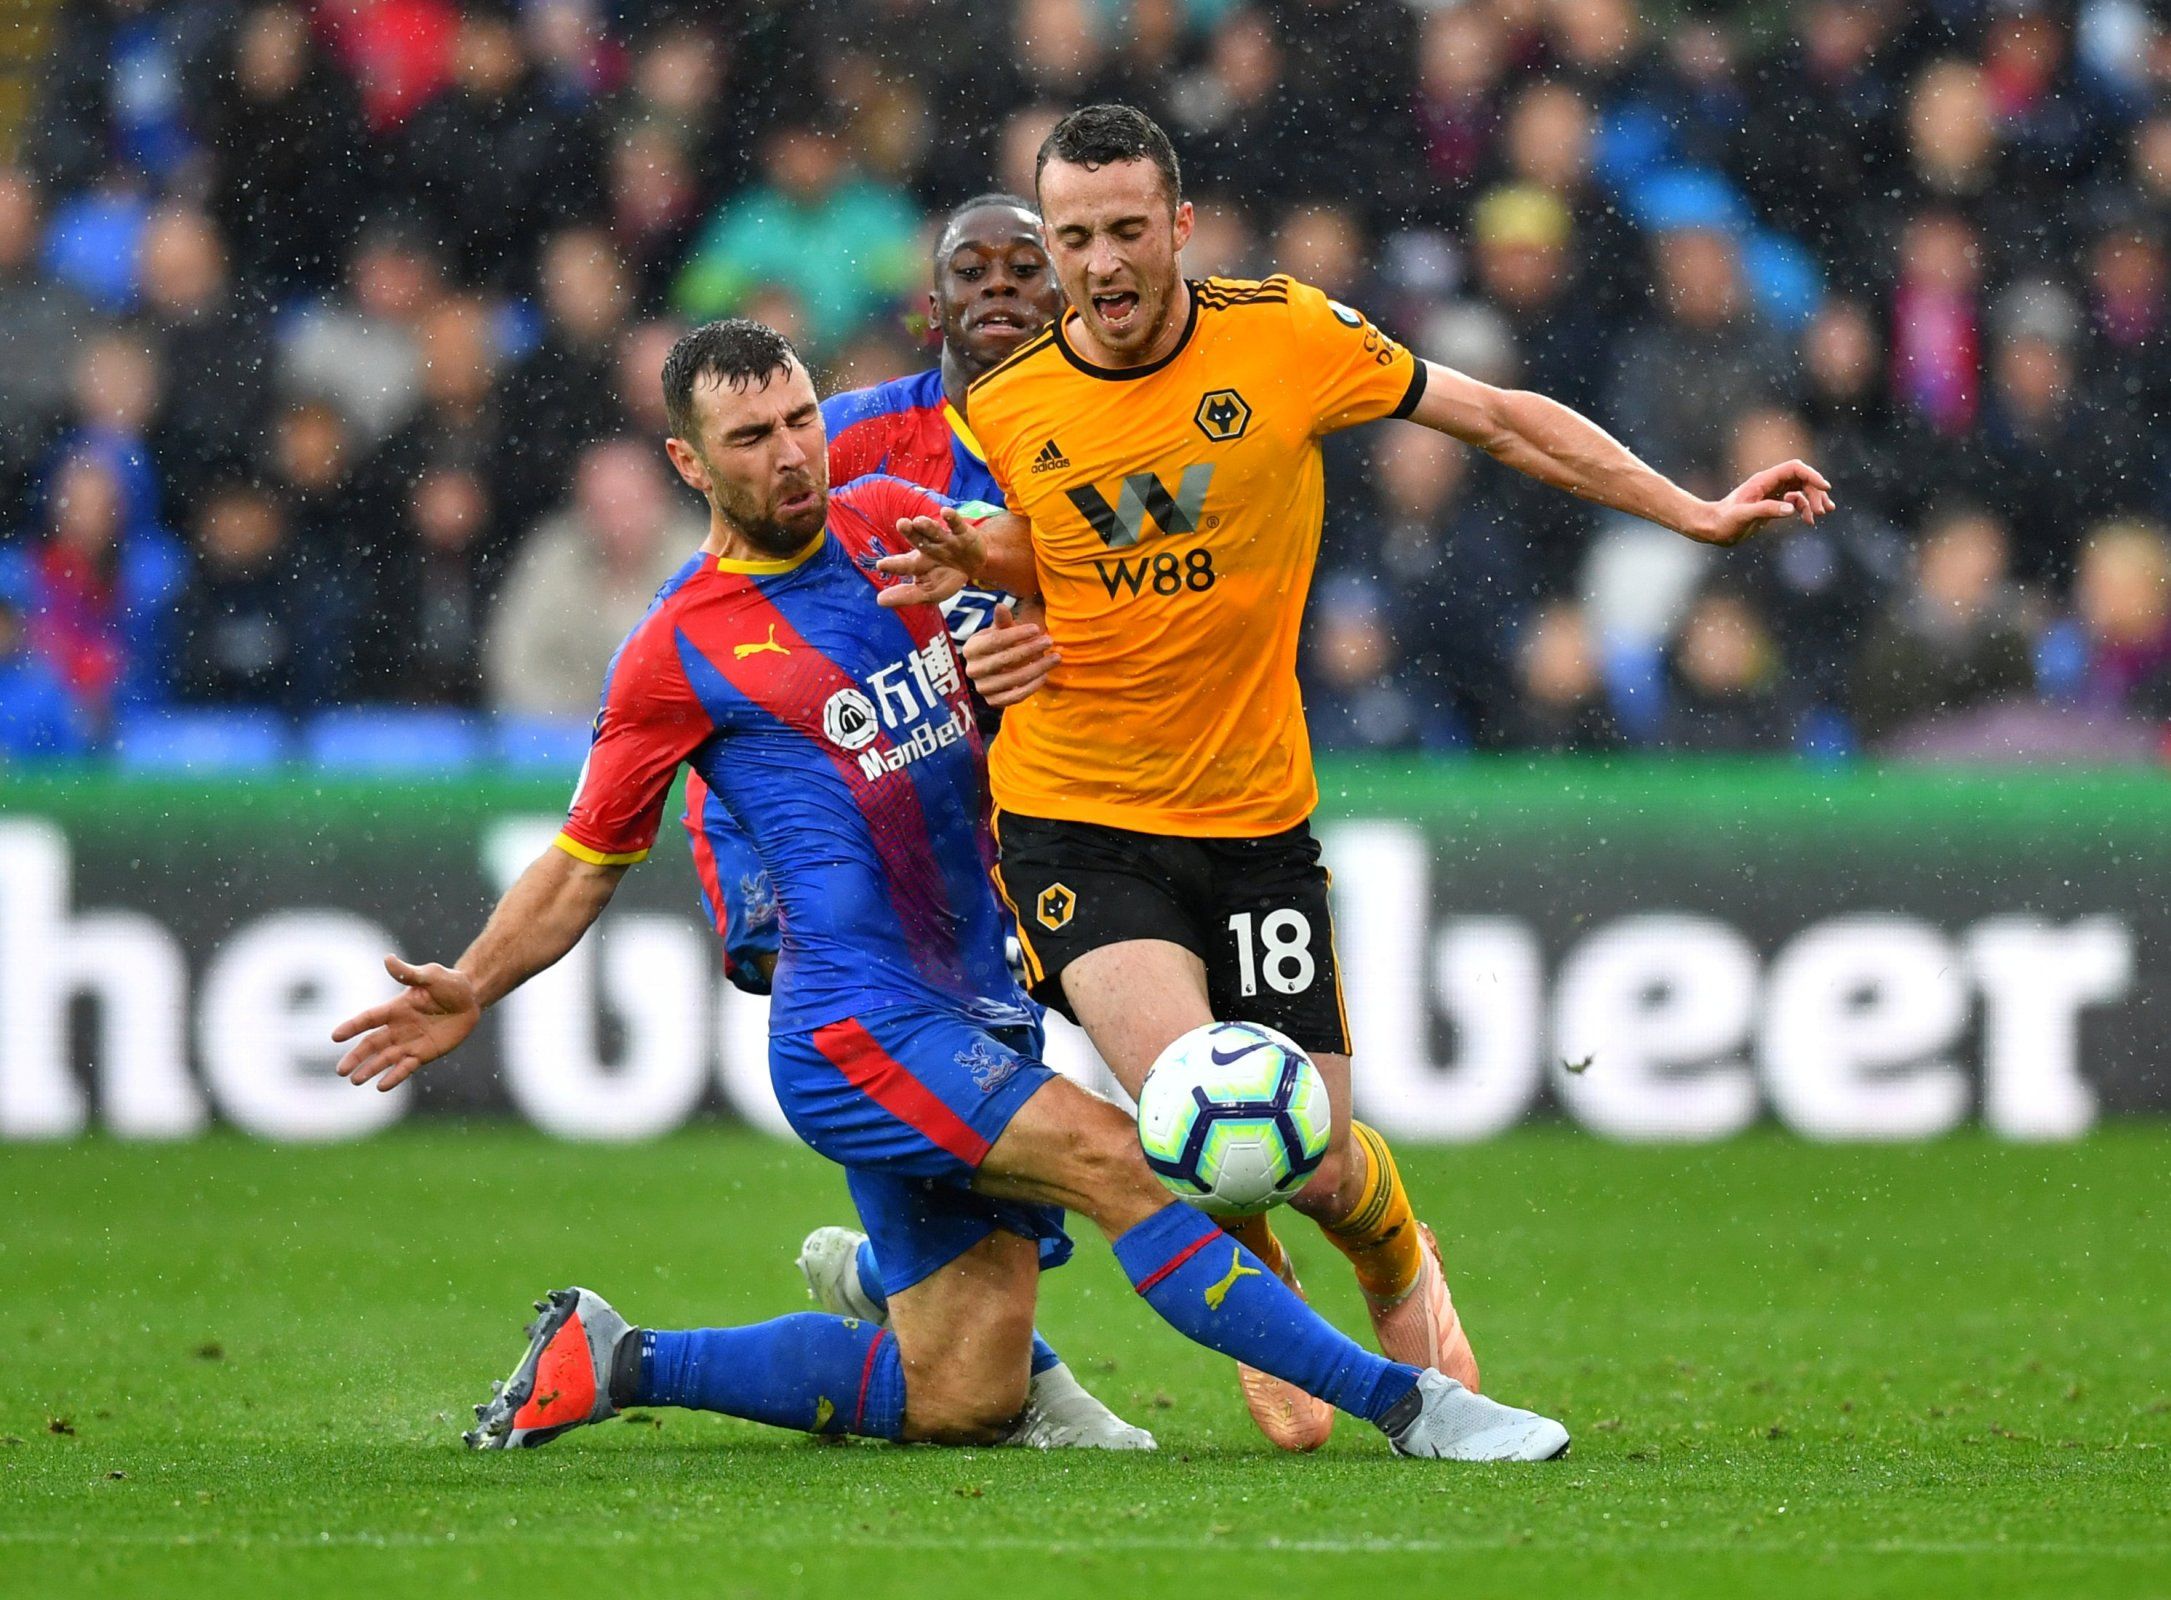 Diogo Jota is fouled